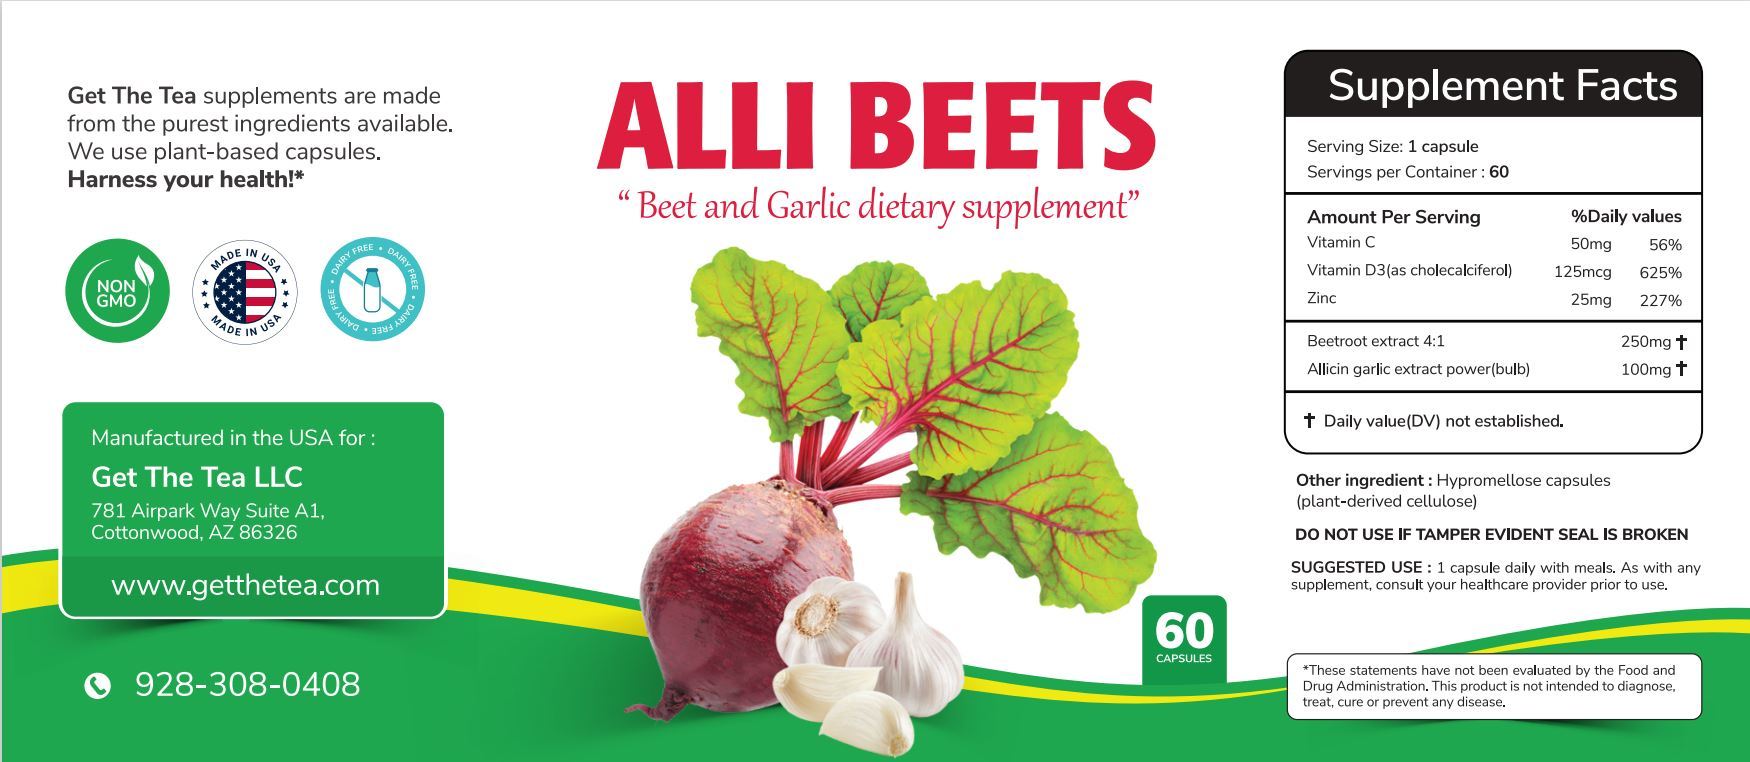 Alli Beets Supplement Facts label